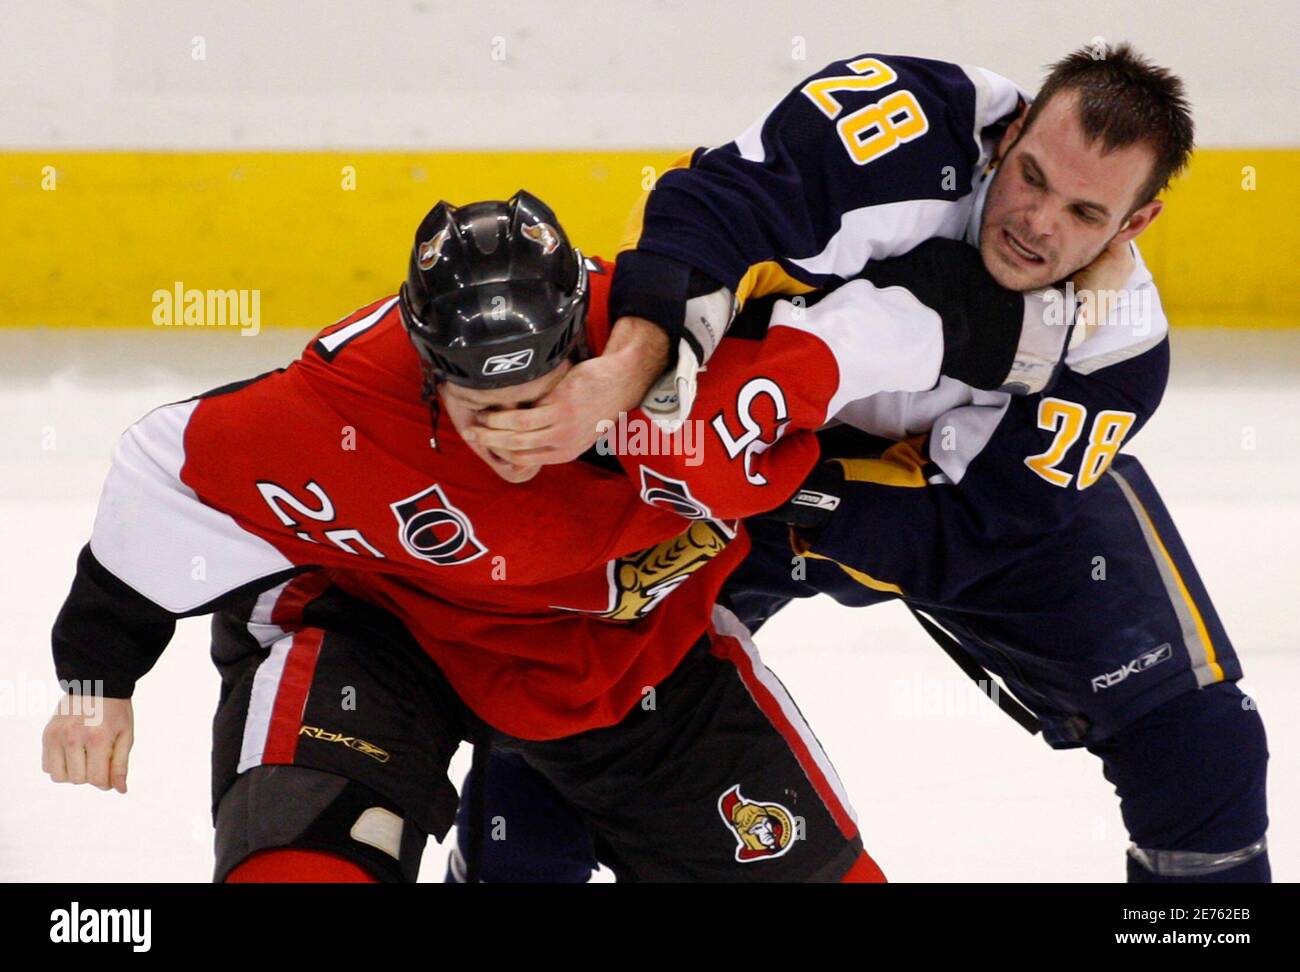 Buffalo Sabres Paul Gaustad (R) fights with Ottawa Senators Chris Neil during the first period of their NHL hockey game in Ottawa January 10, 2008.       REUTERS/Chris Wattie       (CANADA) Stock Photo